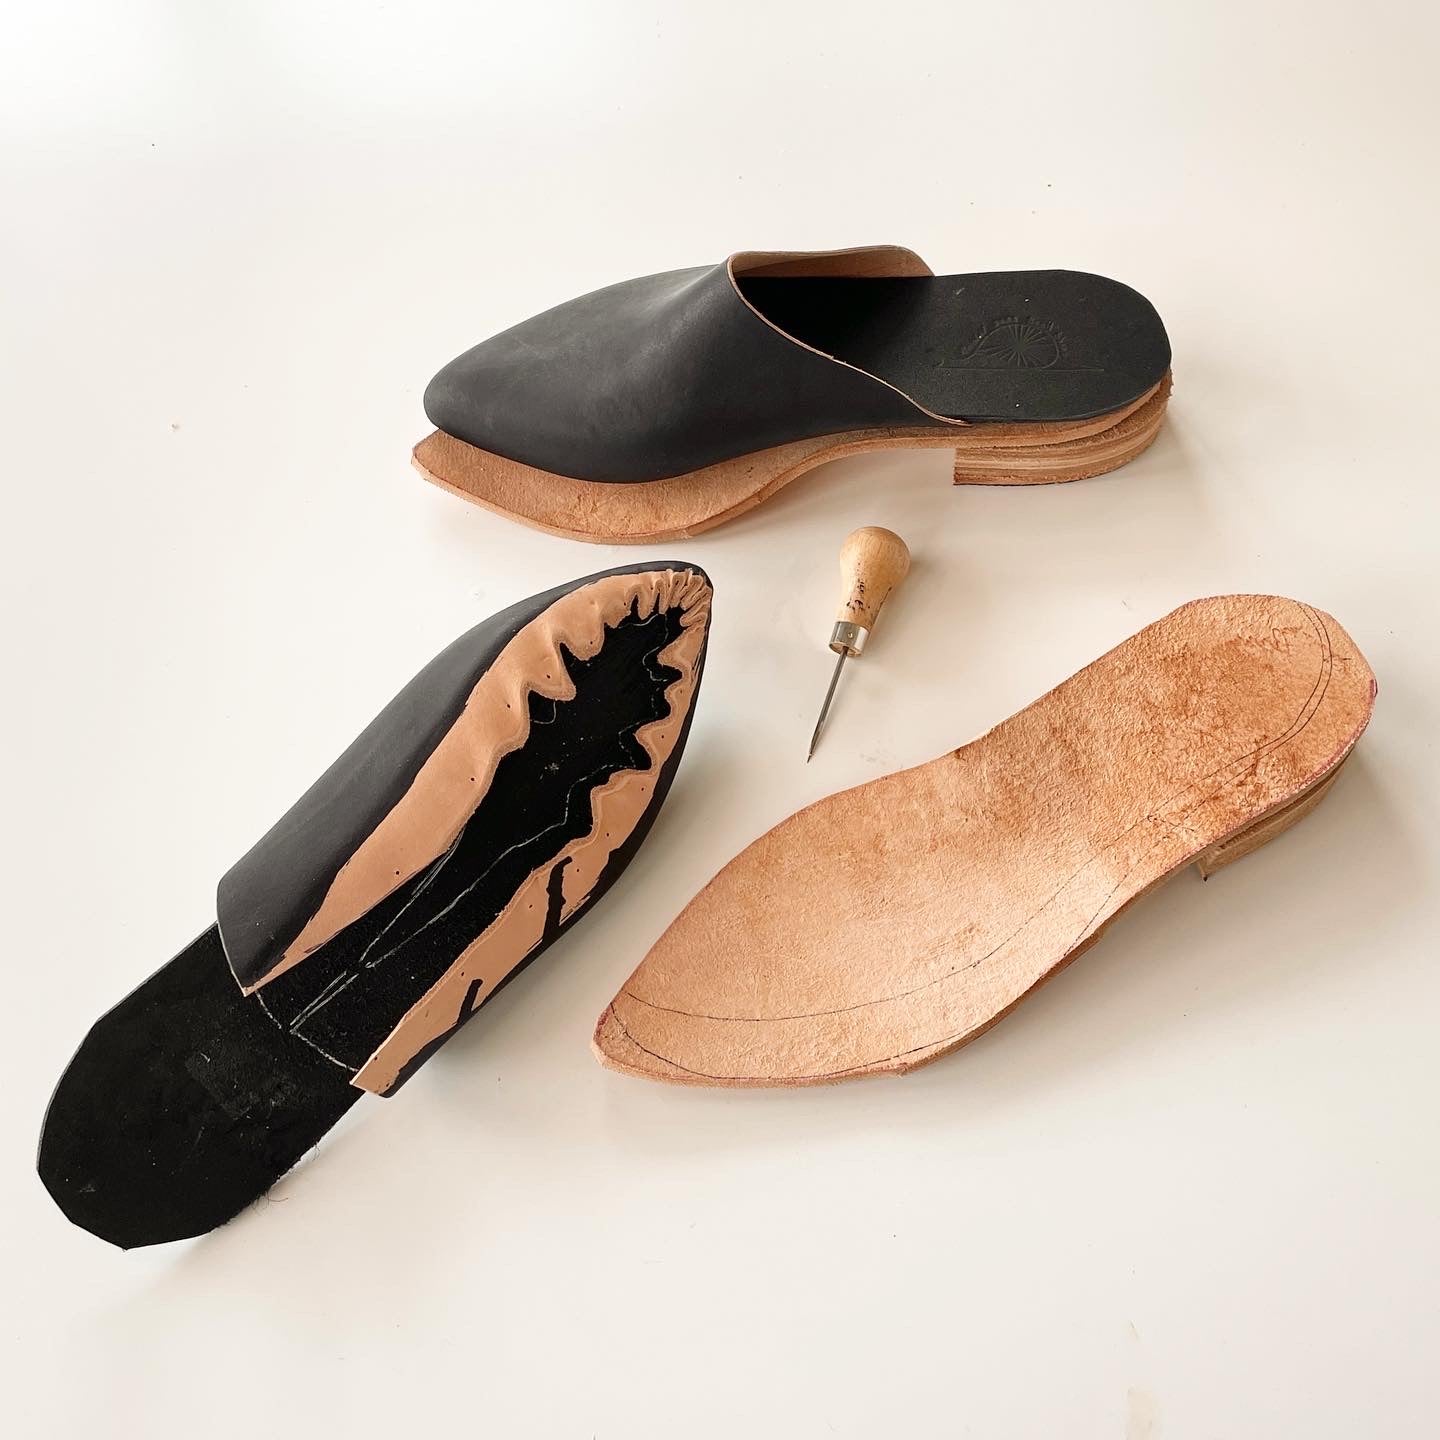 AUG 2nd and 3rd IN-PERSON - Shoe Making Workshop with Rachel Corry